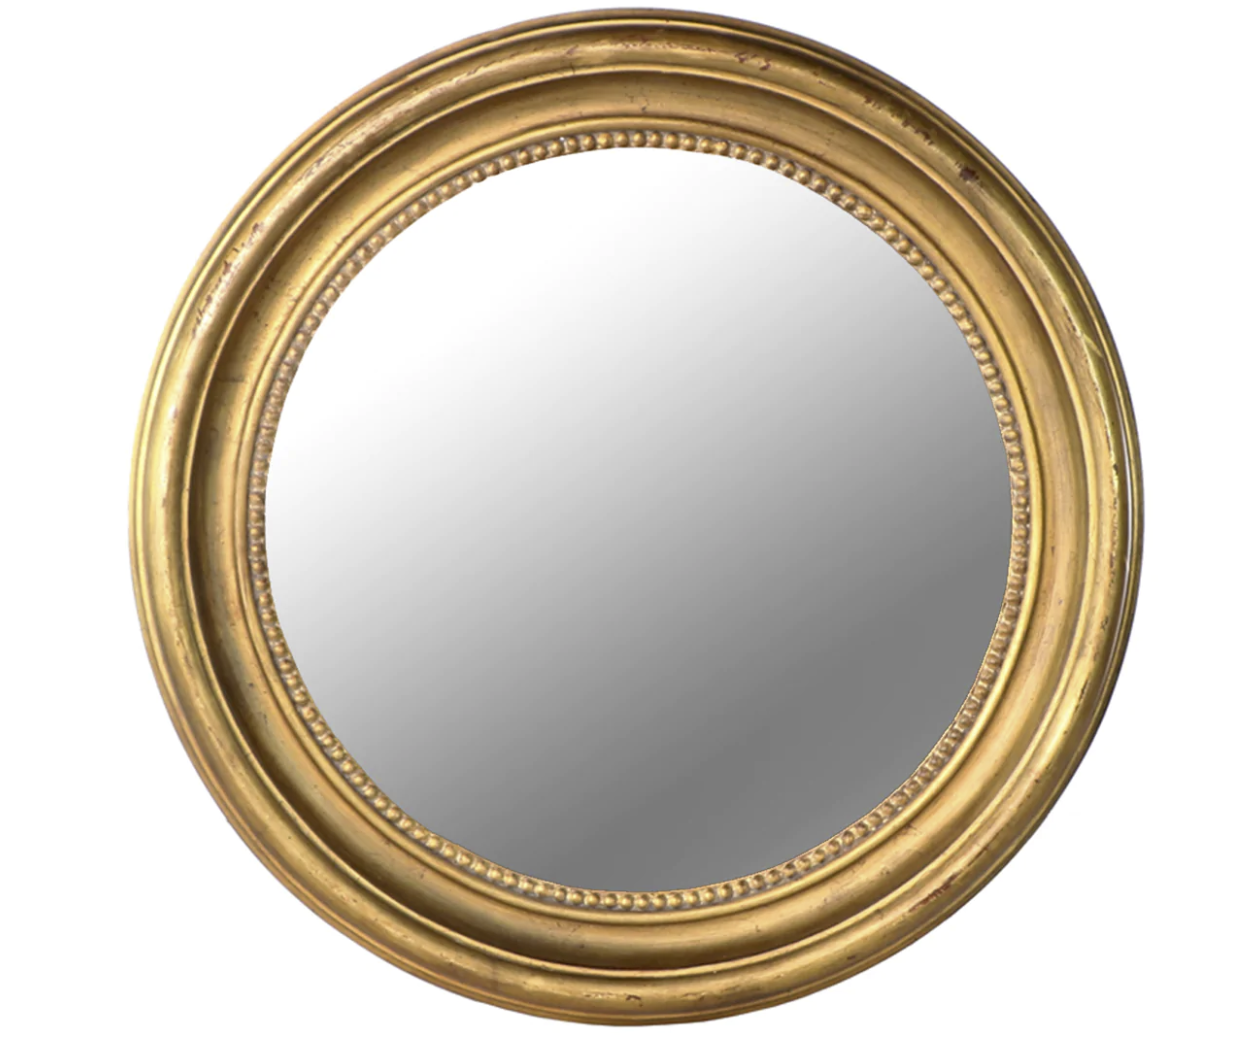 Round Convex Mirror - A unique Round Convex Mirror from Grace Blu Shoppe, adding visual interest and depth to your space.